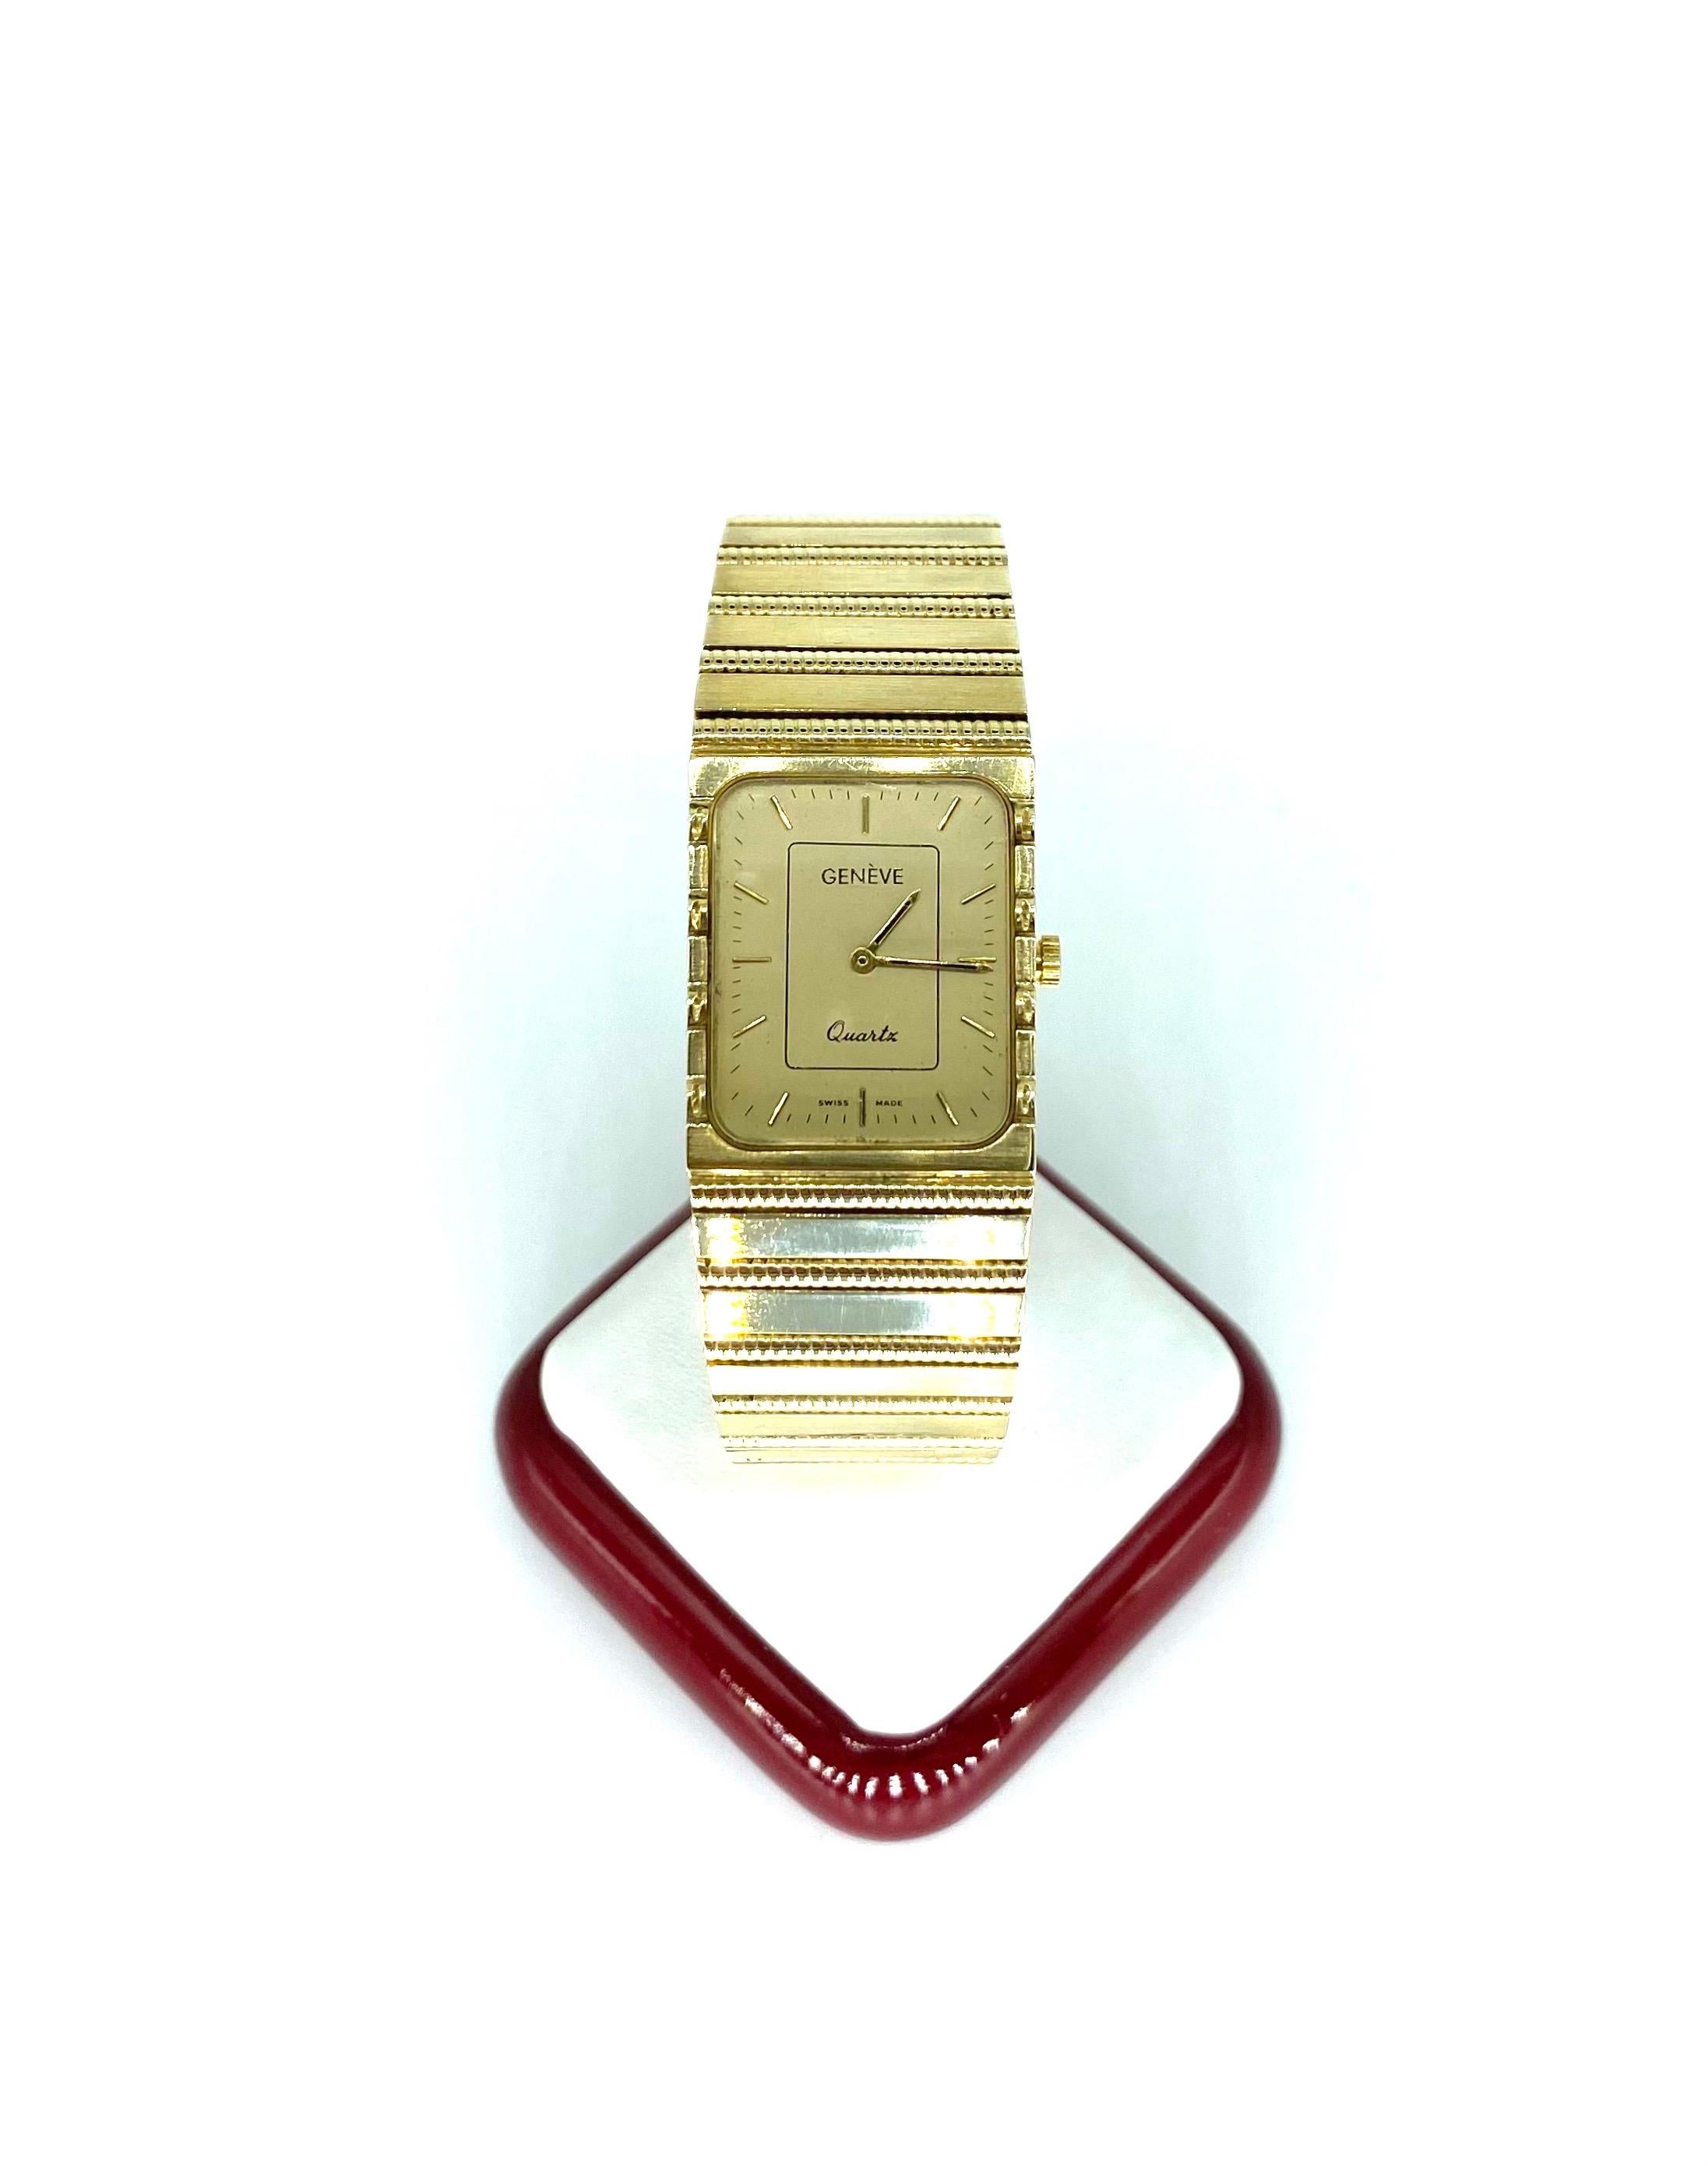 Geneve 14k Gold Fancy Nugget Design Bracelet Swiss Watch. Recently serviced and works excellent. Iconic 1970s look with the solid good bracelet watch from Geneve.  Very 